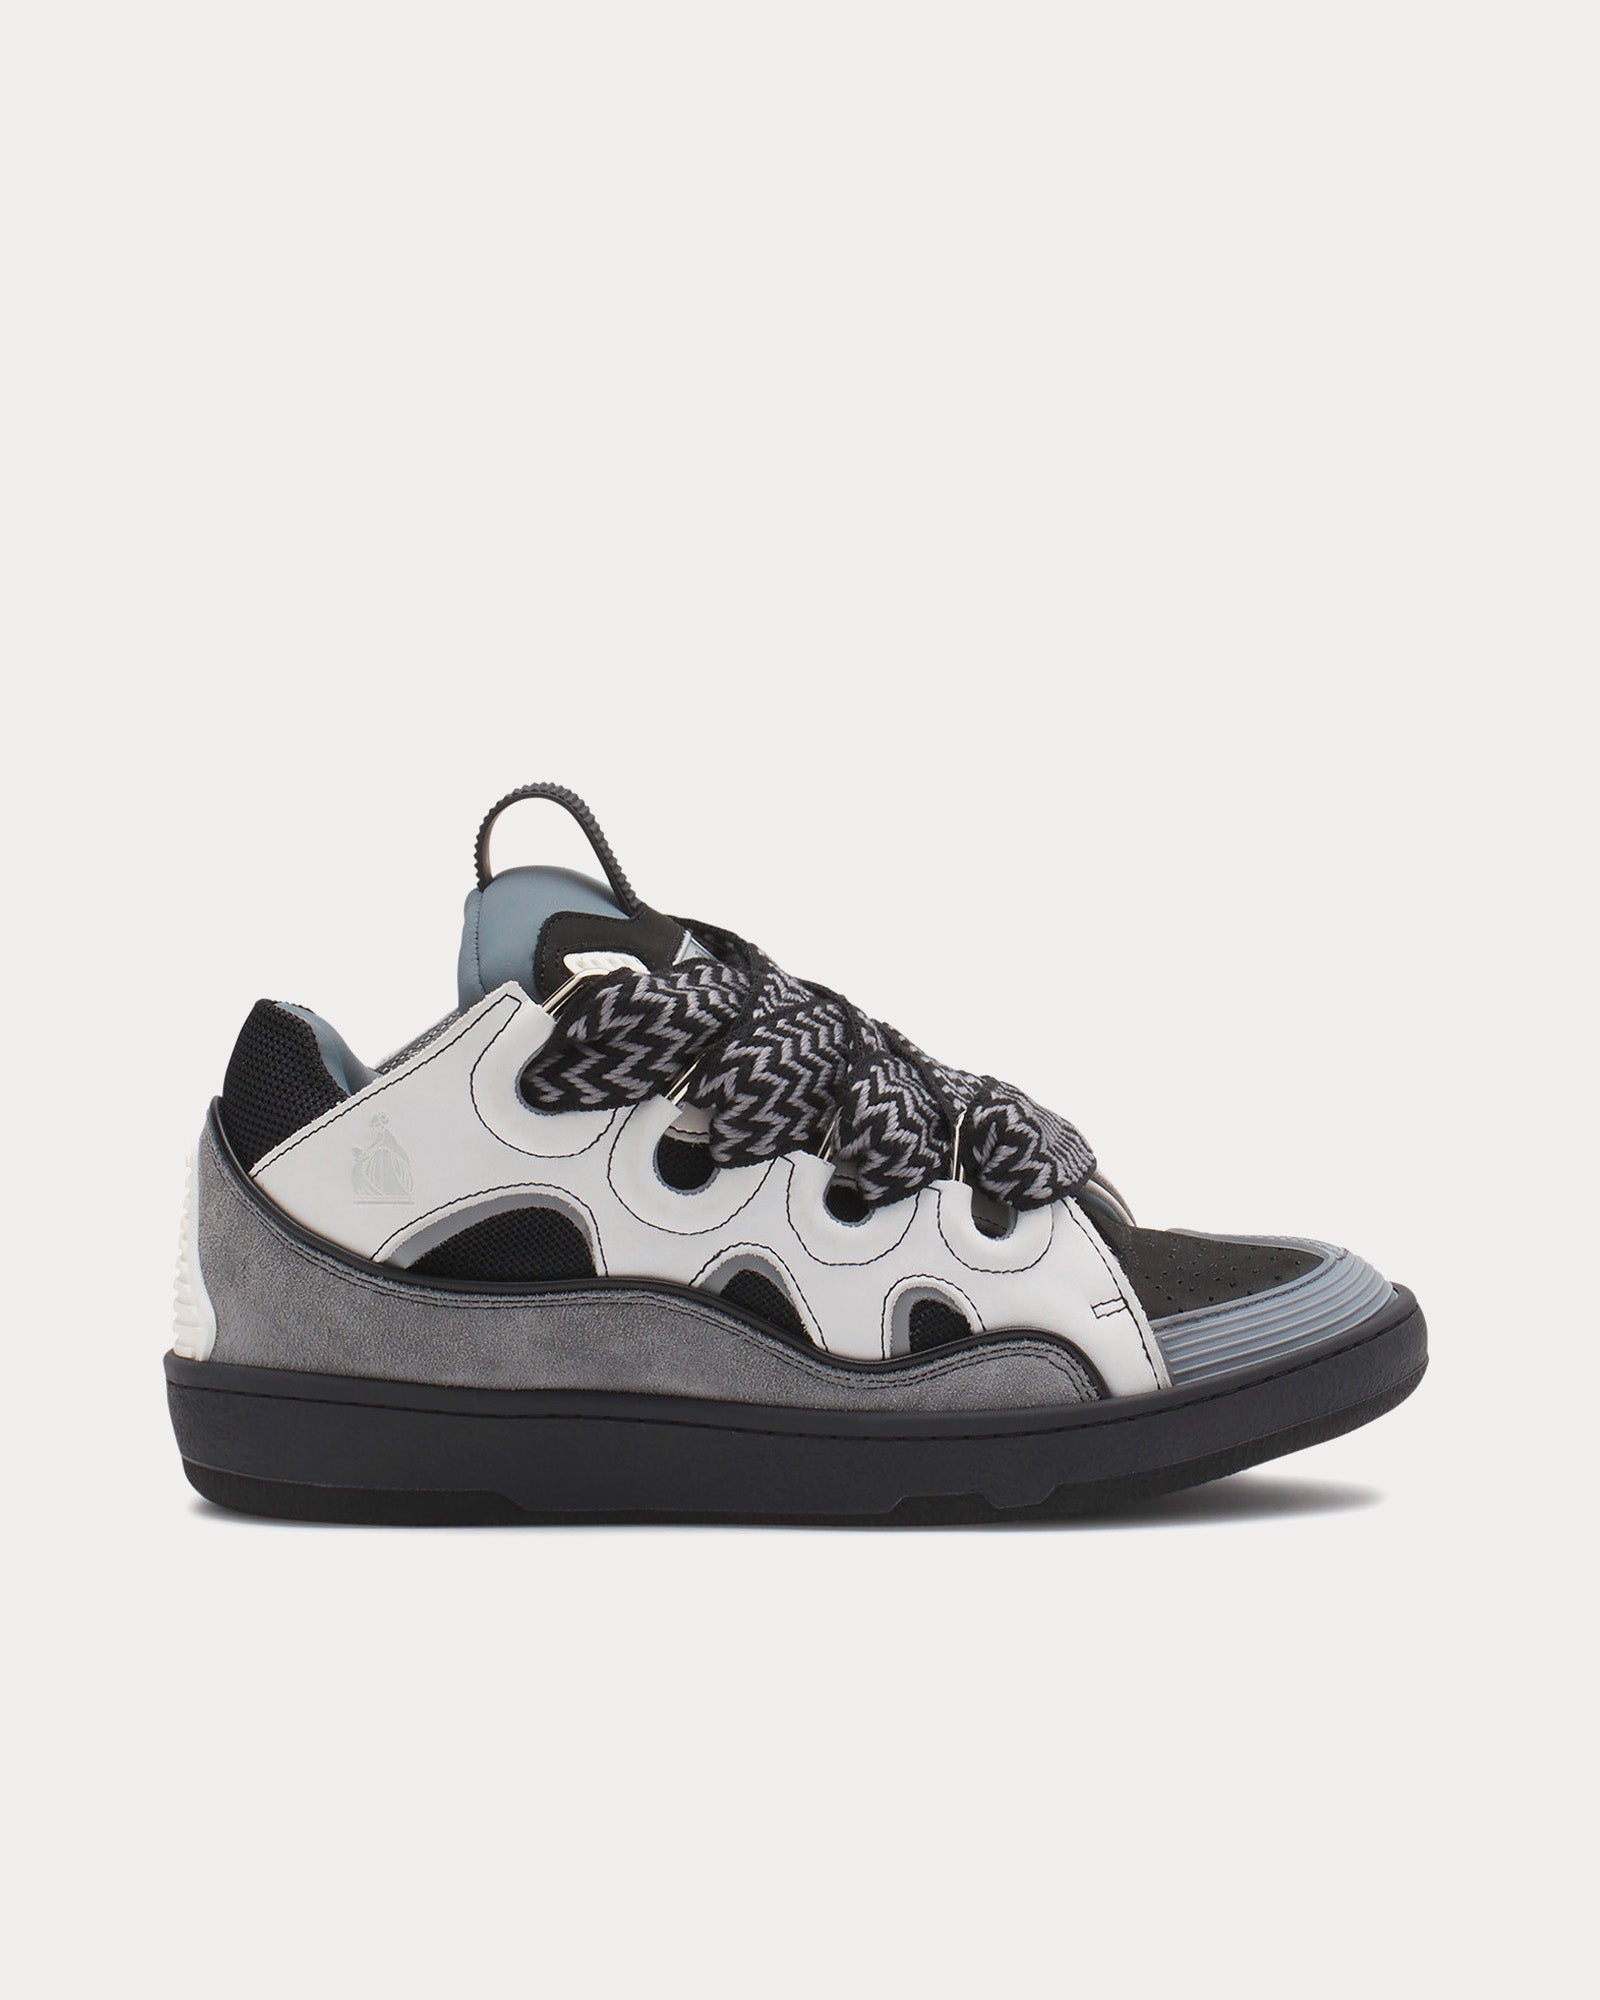 Lanvin - Curb Leather White / Anthracite Low Top Sneakers